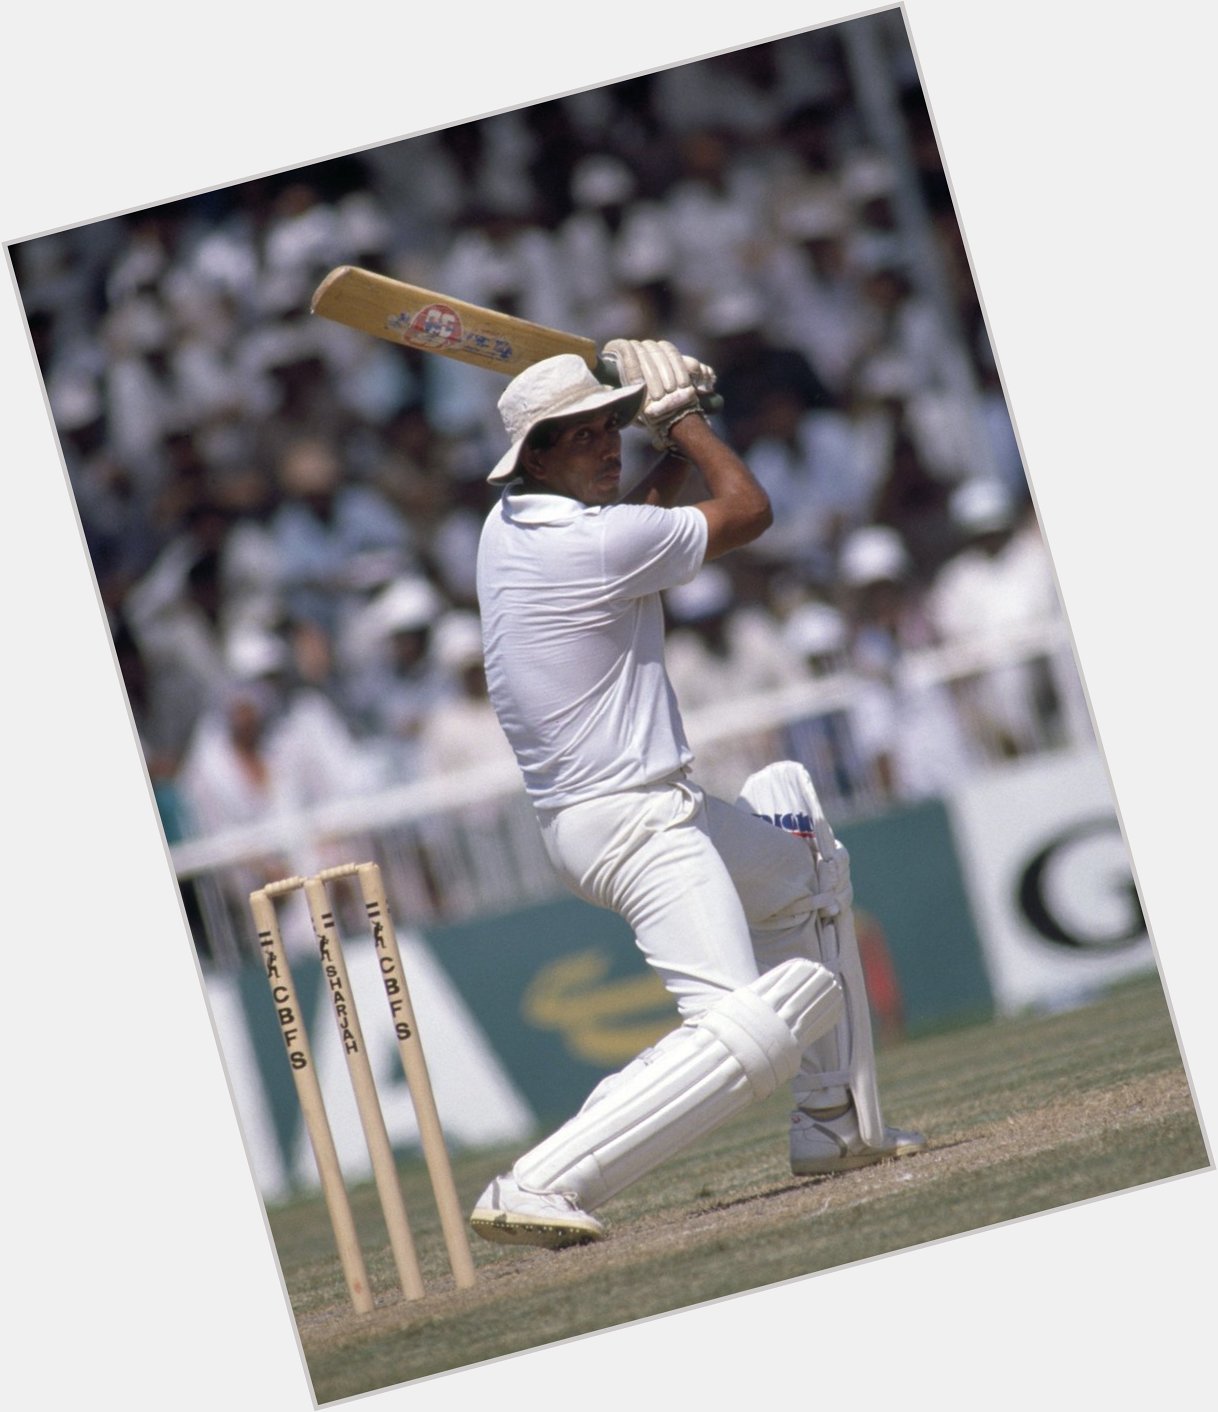 Happy Birthday to the Player of the Match in the 1983 Final
former India batsman Mohinder Amarnath. 